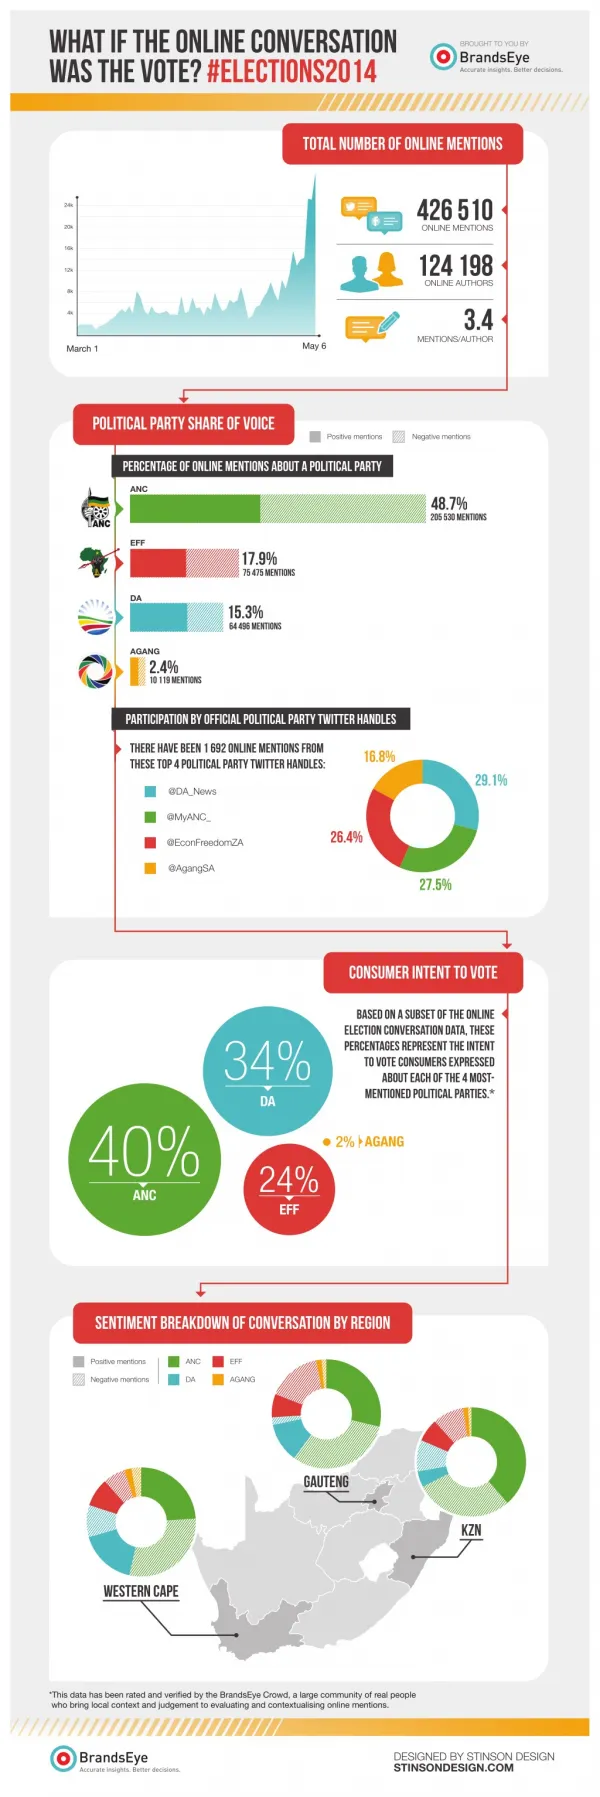 South African Elections 2014 - Online Sentiment